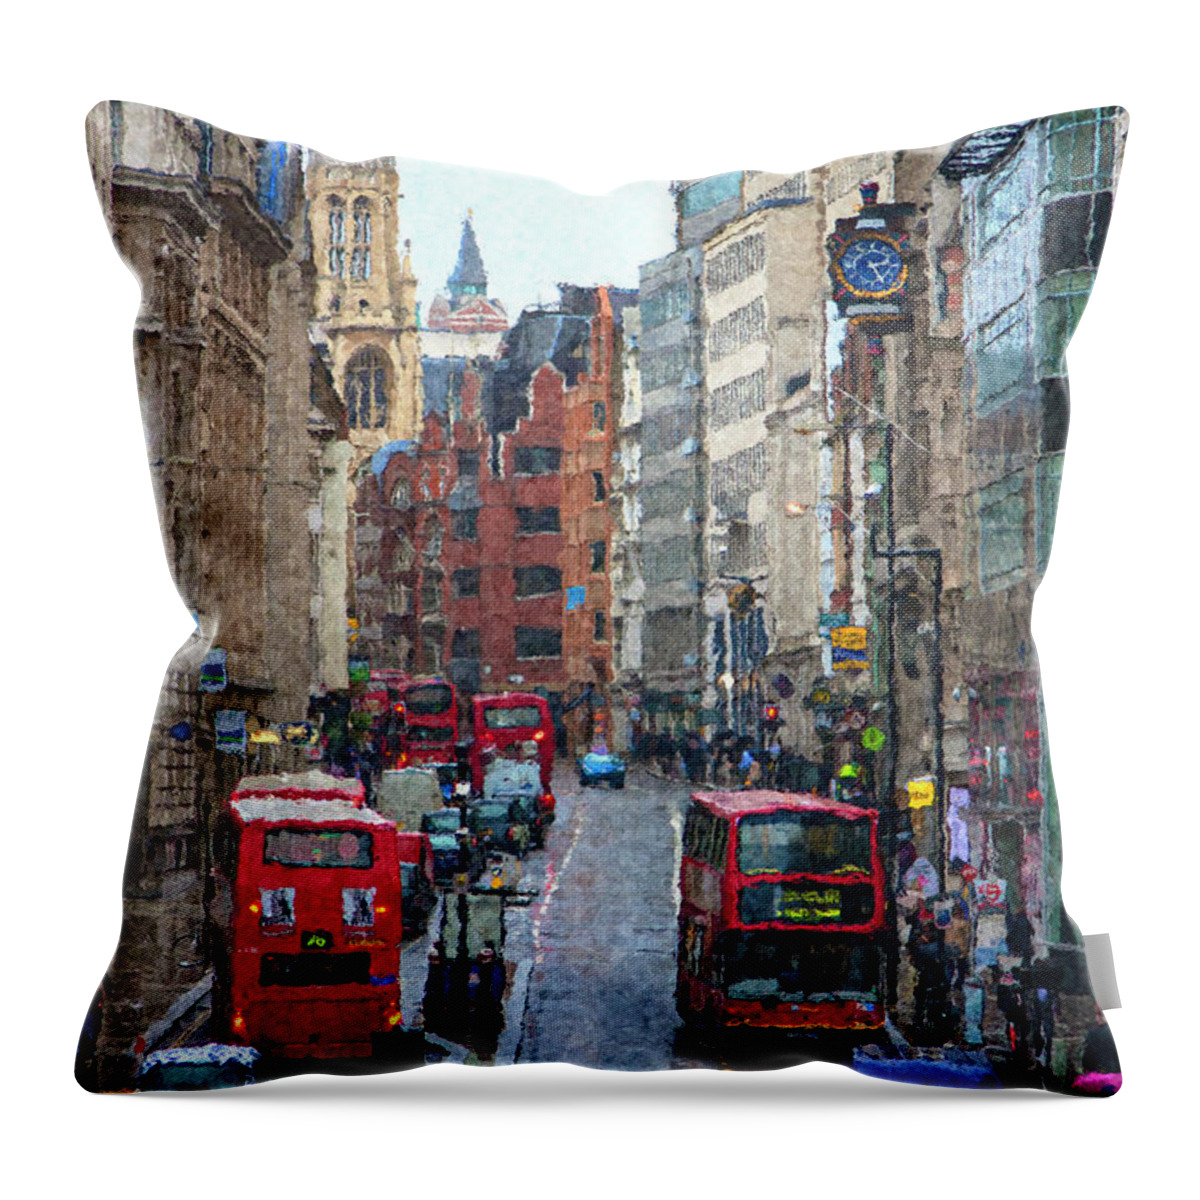 London Throw Pillow featuring the digital art Busy London Street by SnapHappy Photos